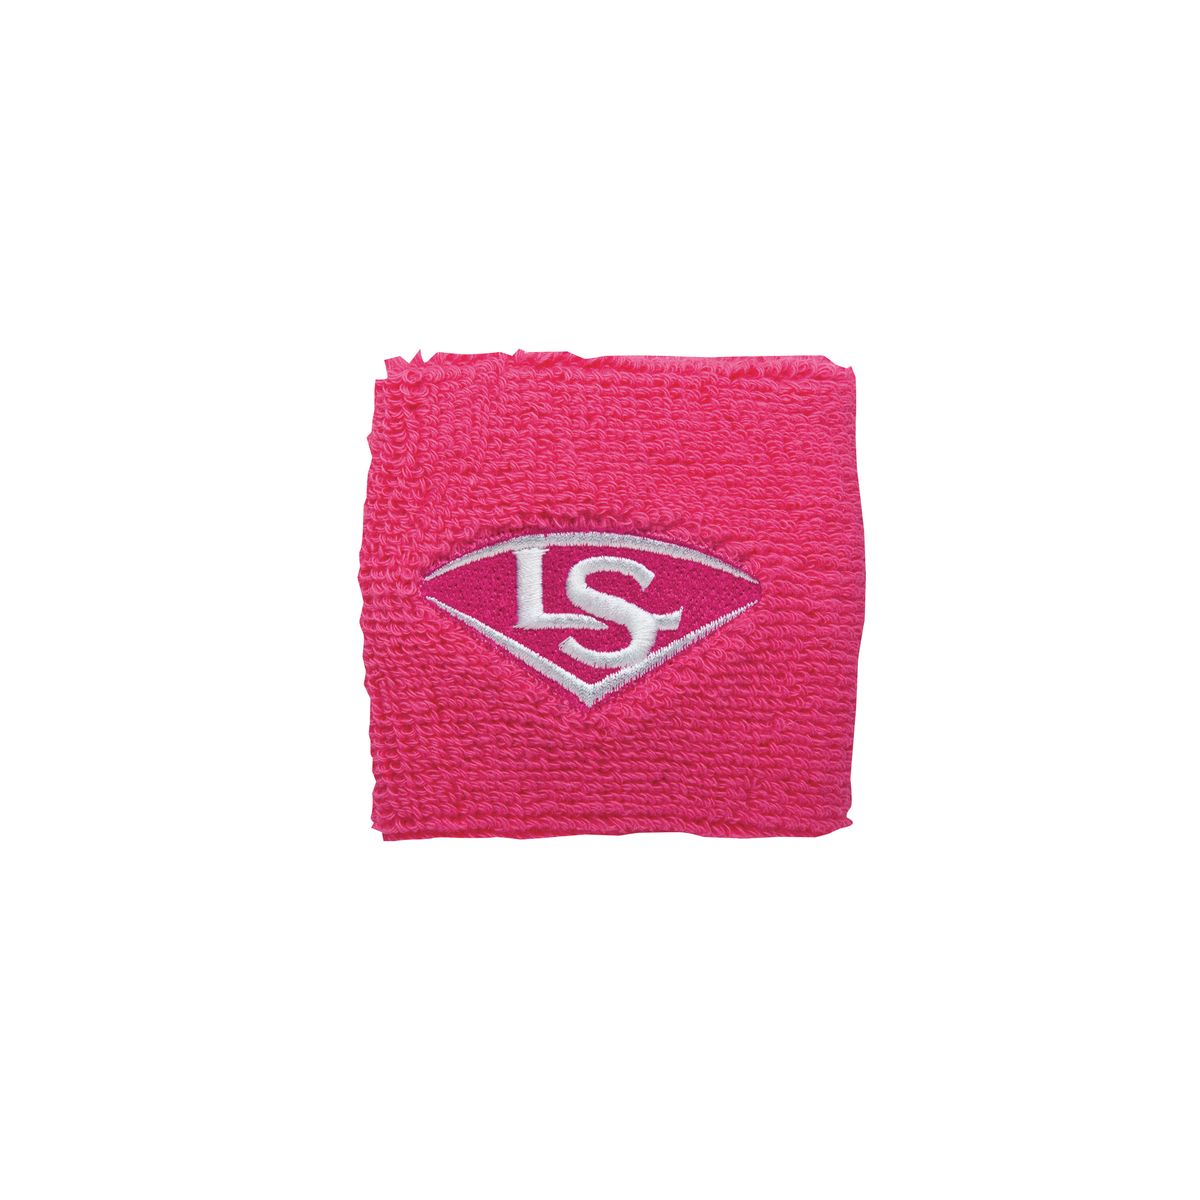 LS BASEBALL 2.5 TRADITIONAL WRIST BAND IN Pink - Lanctôt Team Sports